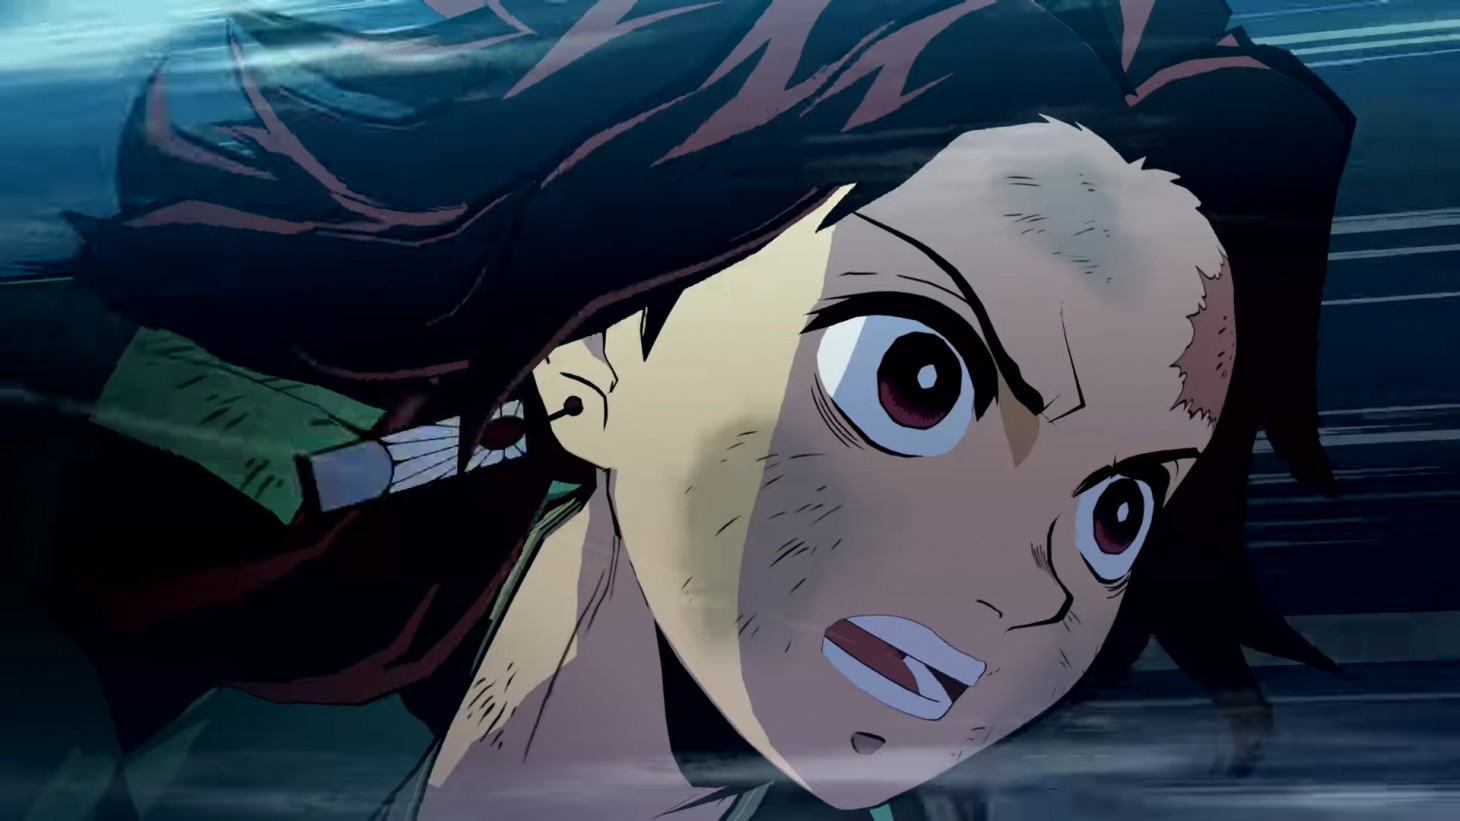 Demon Slayer Game Trailer From Sony State Of Play Lacks The Anime's